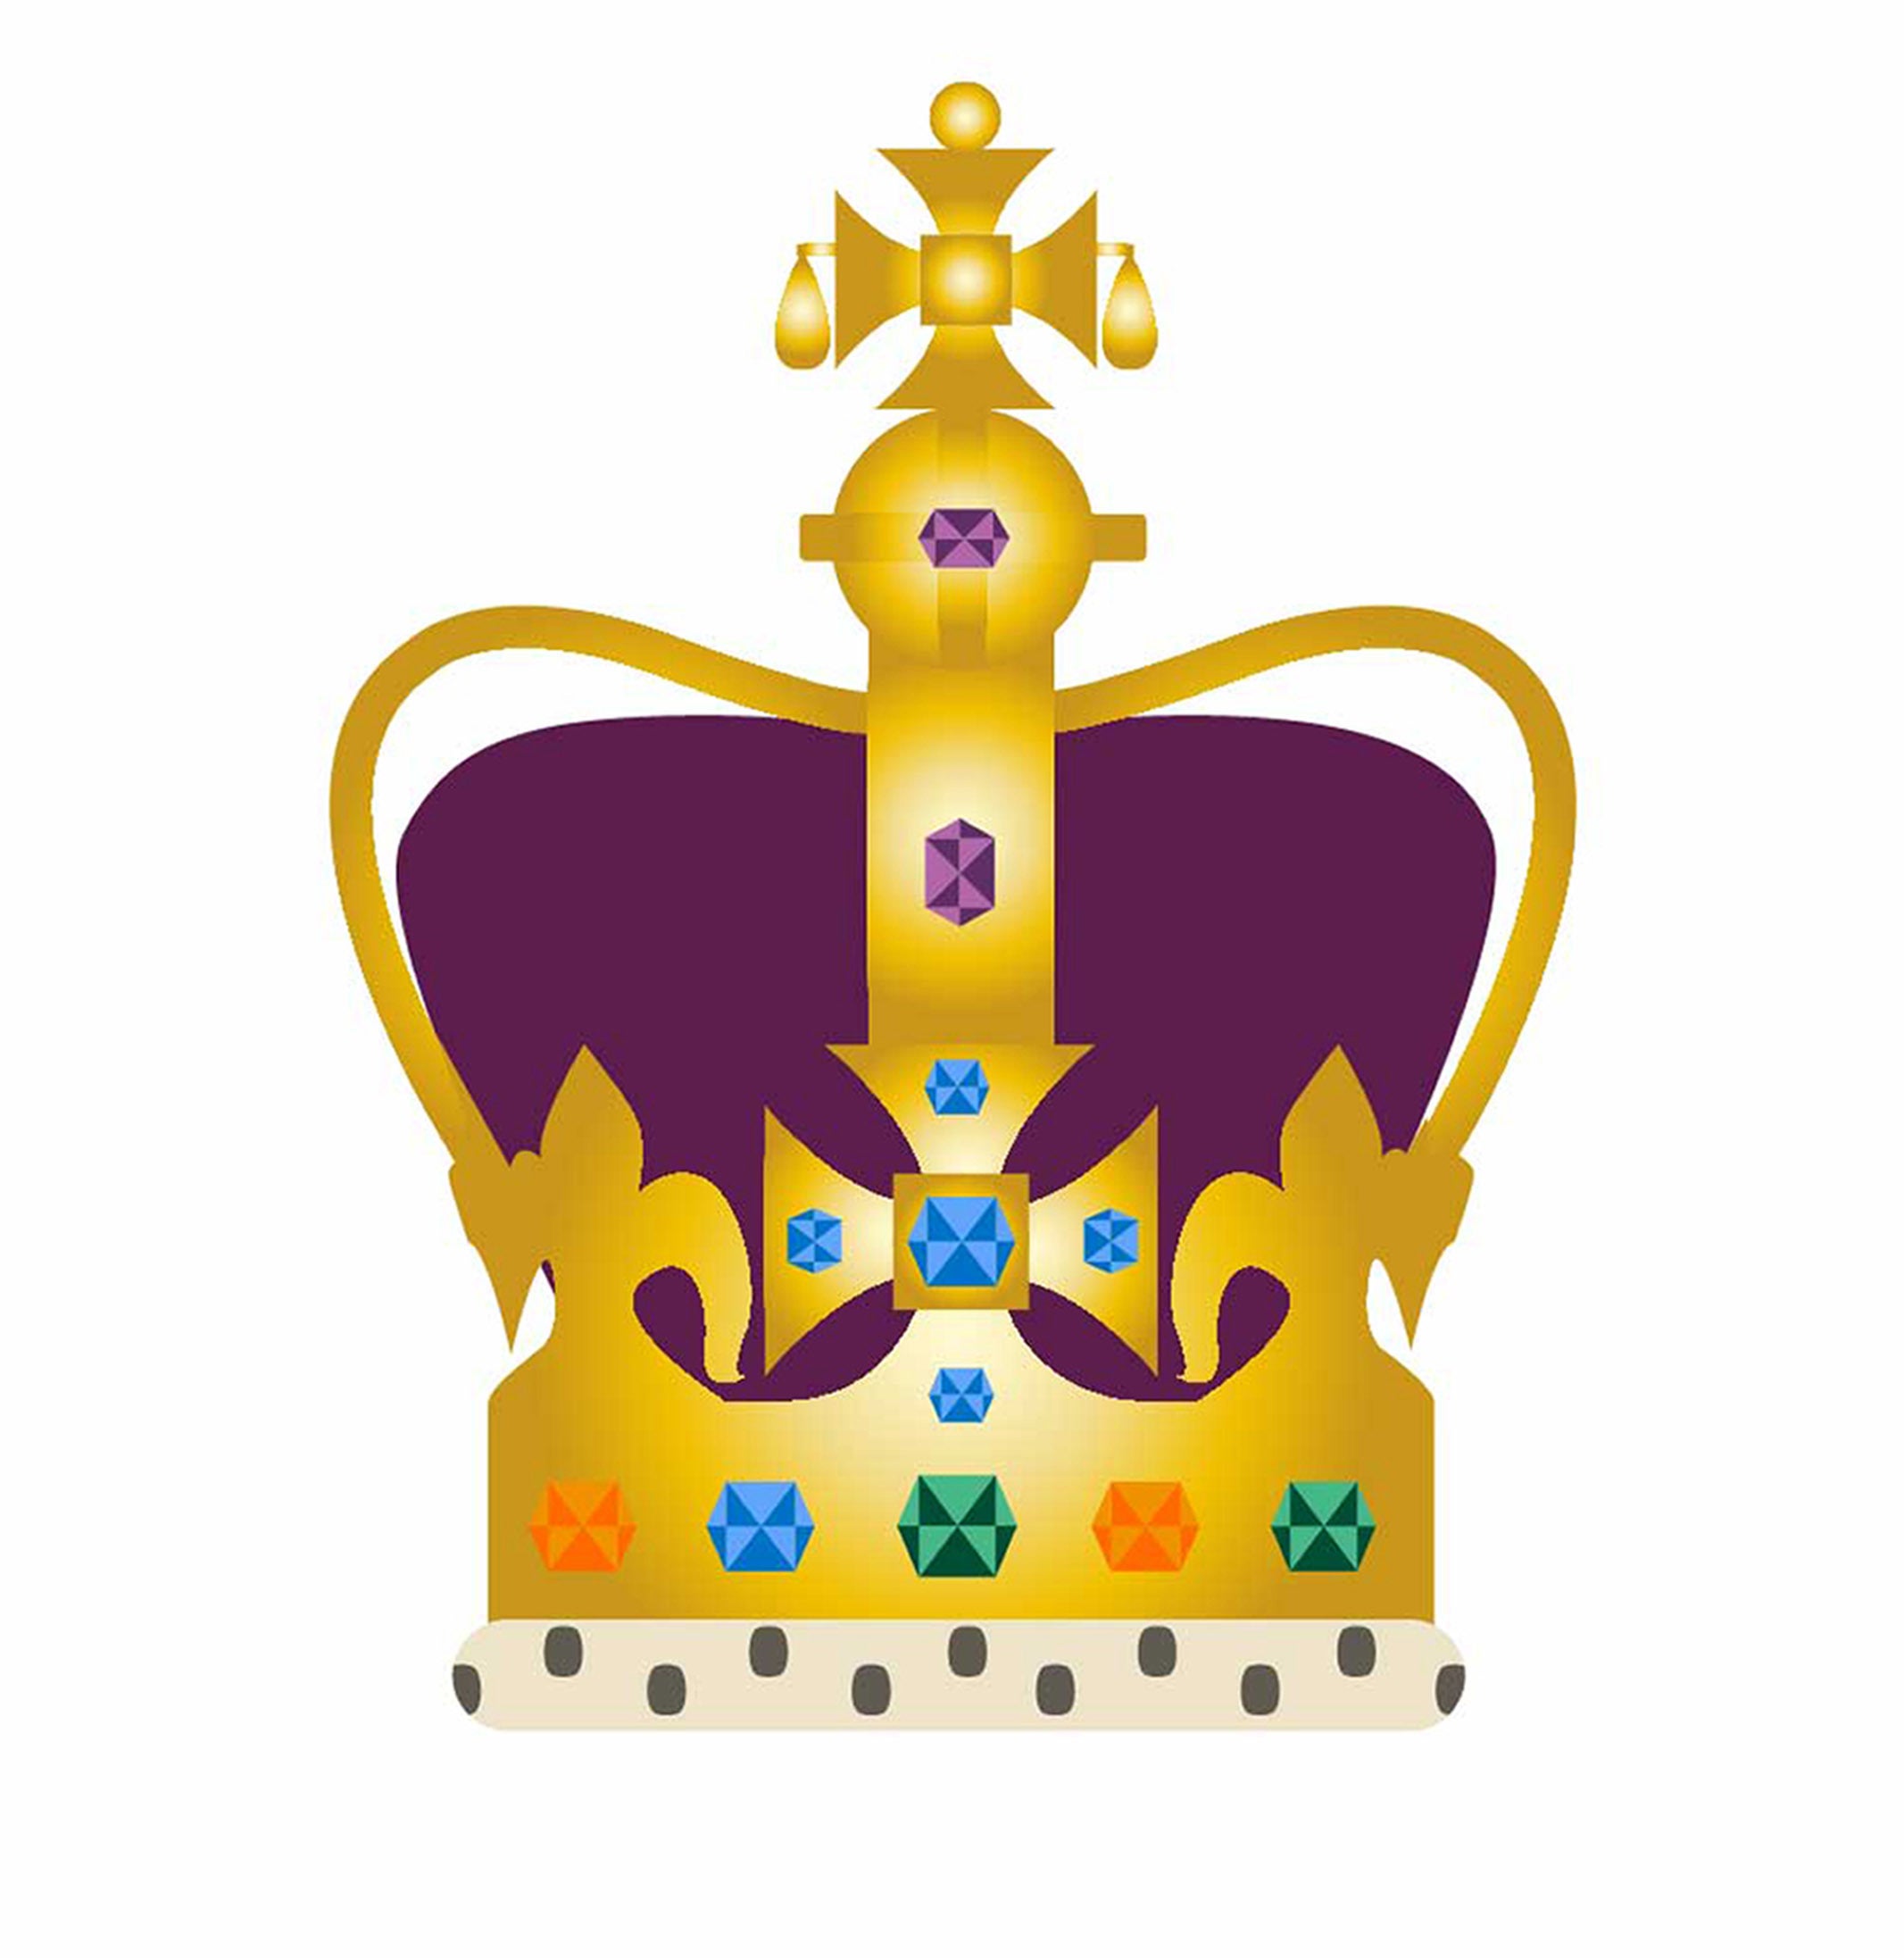 This is the official Twitter emoji for King Charles's coronation | The Independent